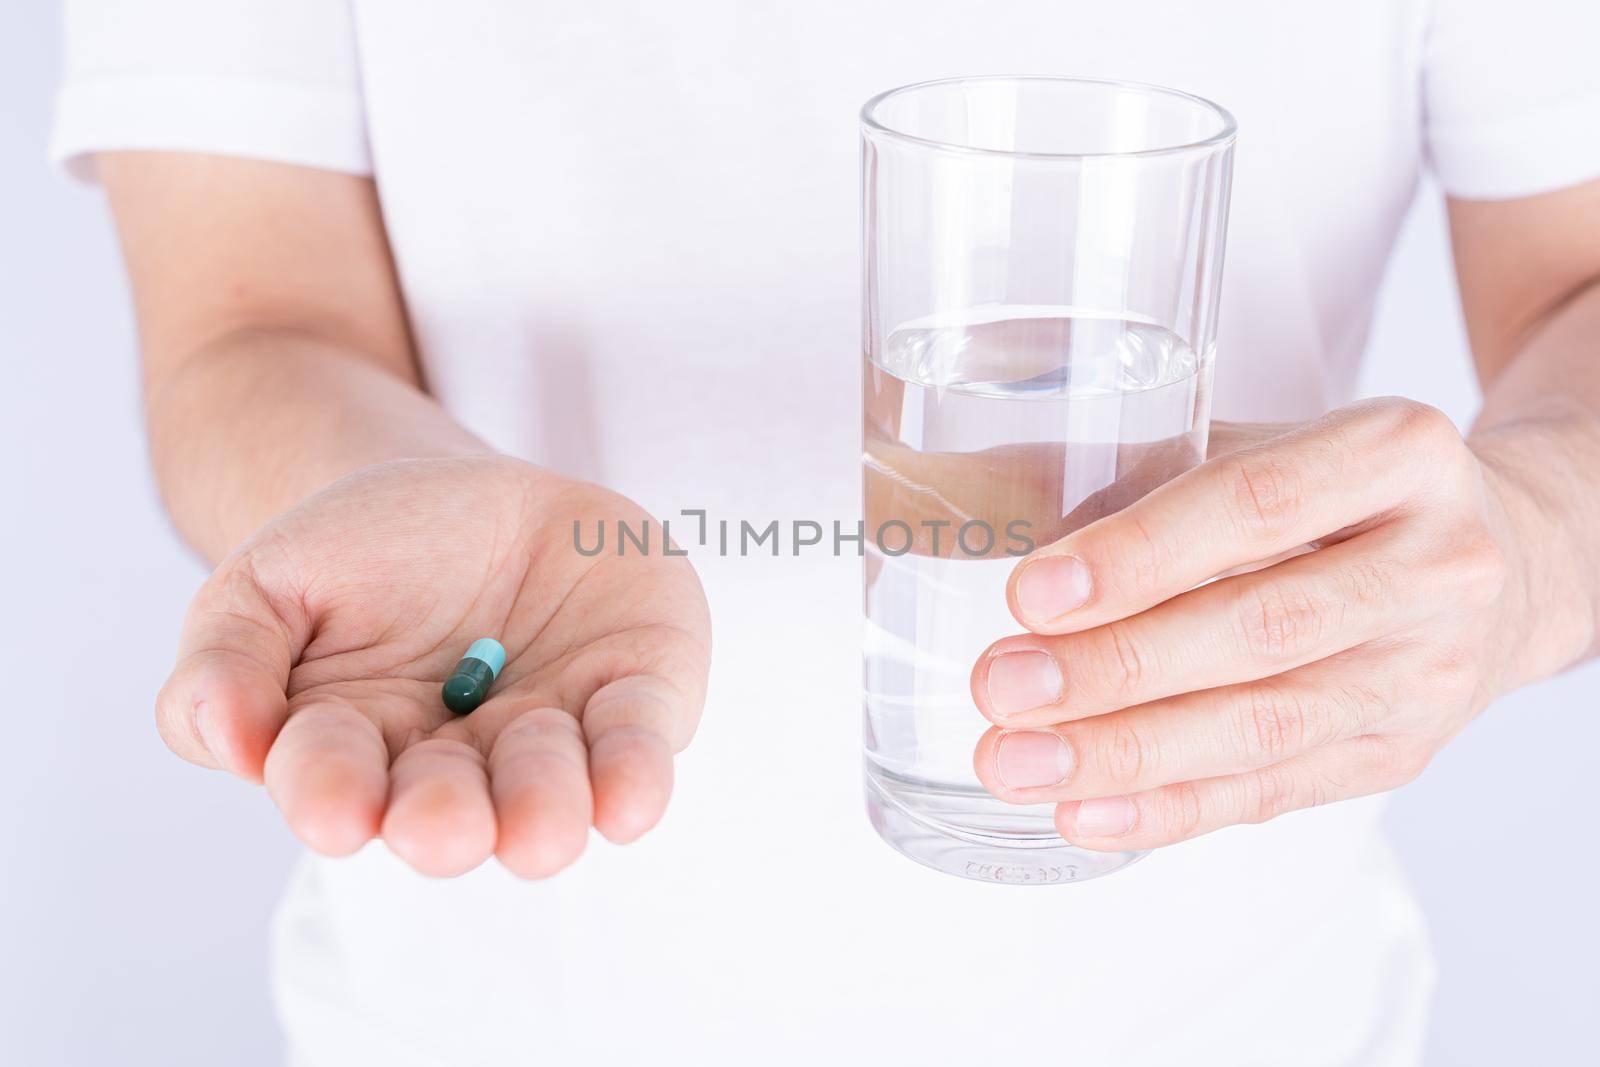 Close up hands holding glass of water and pill drugs. Healthcare and medical pharmacy concept.